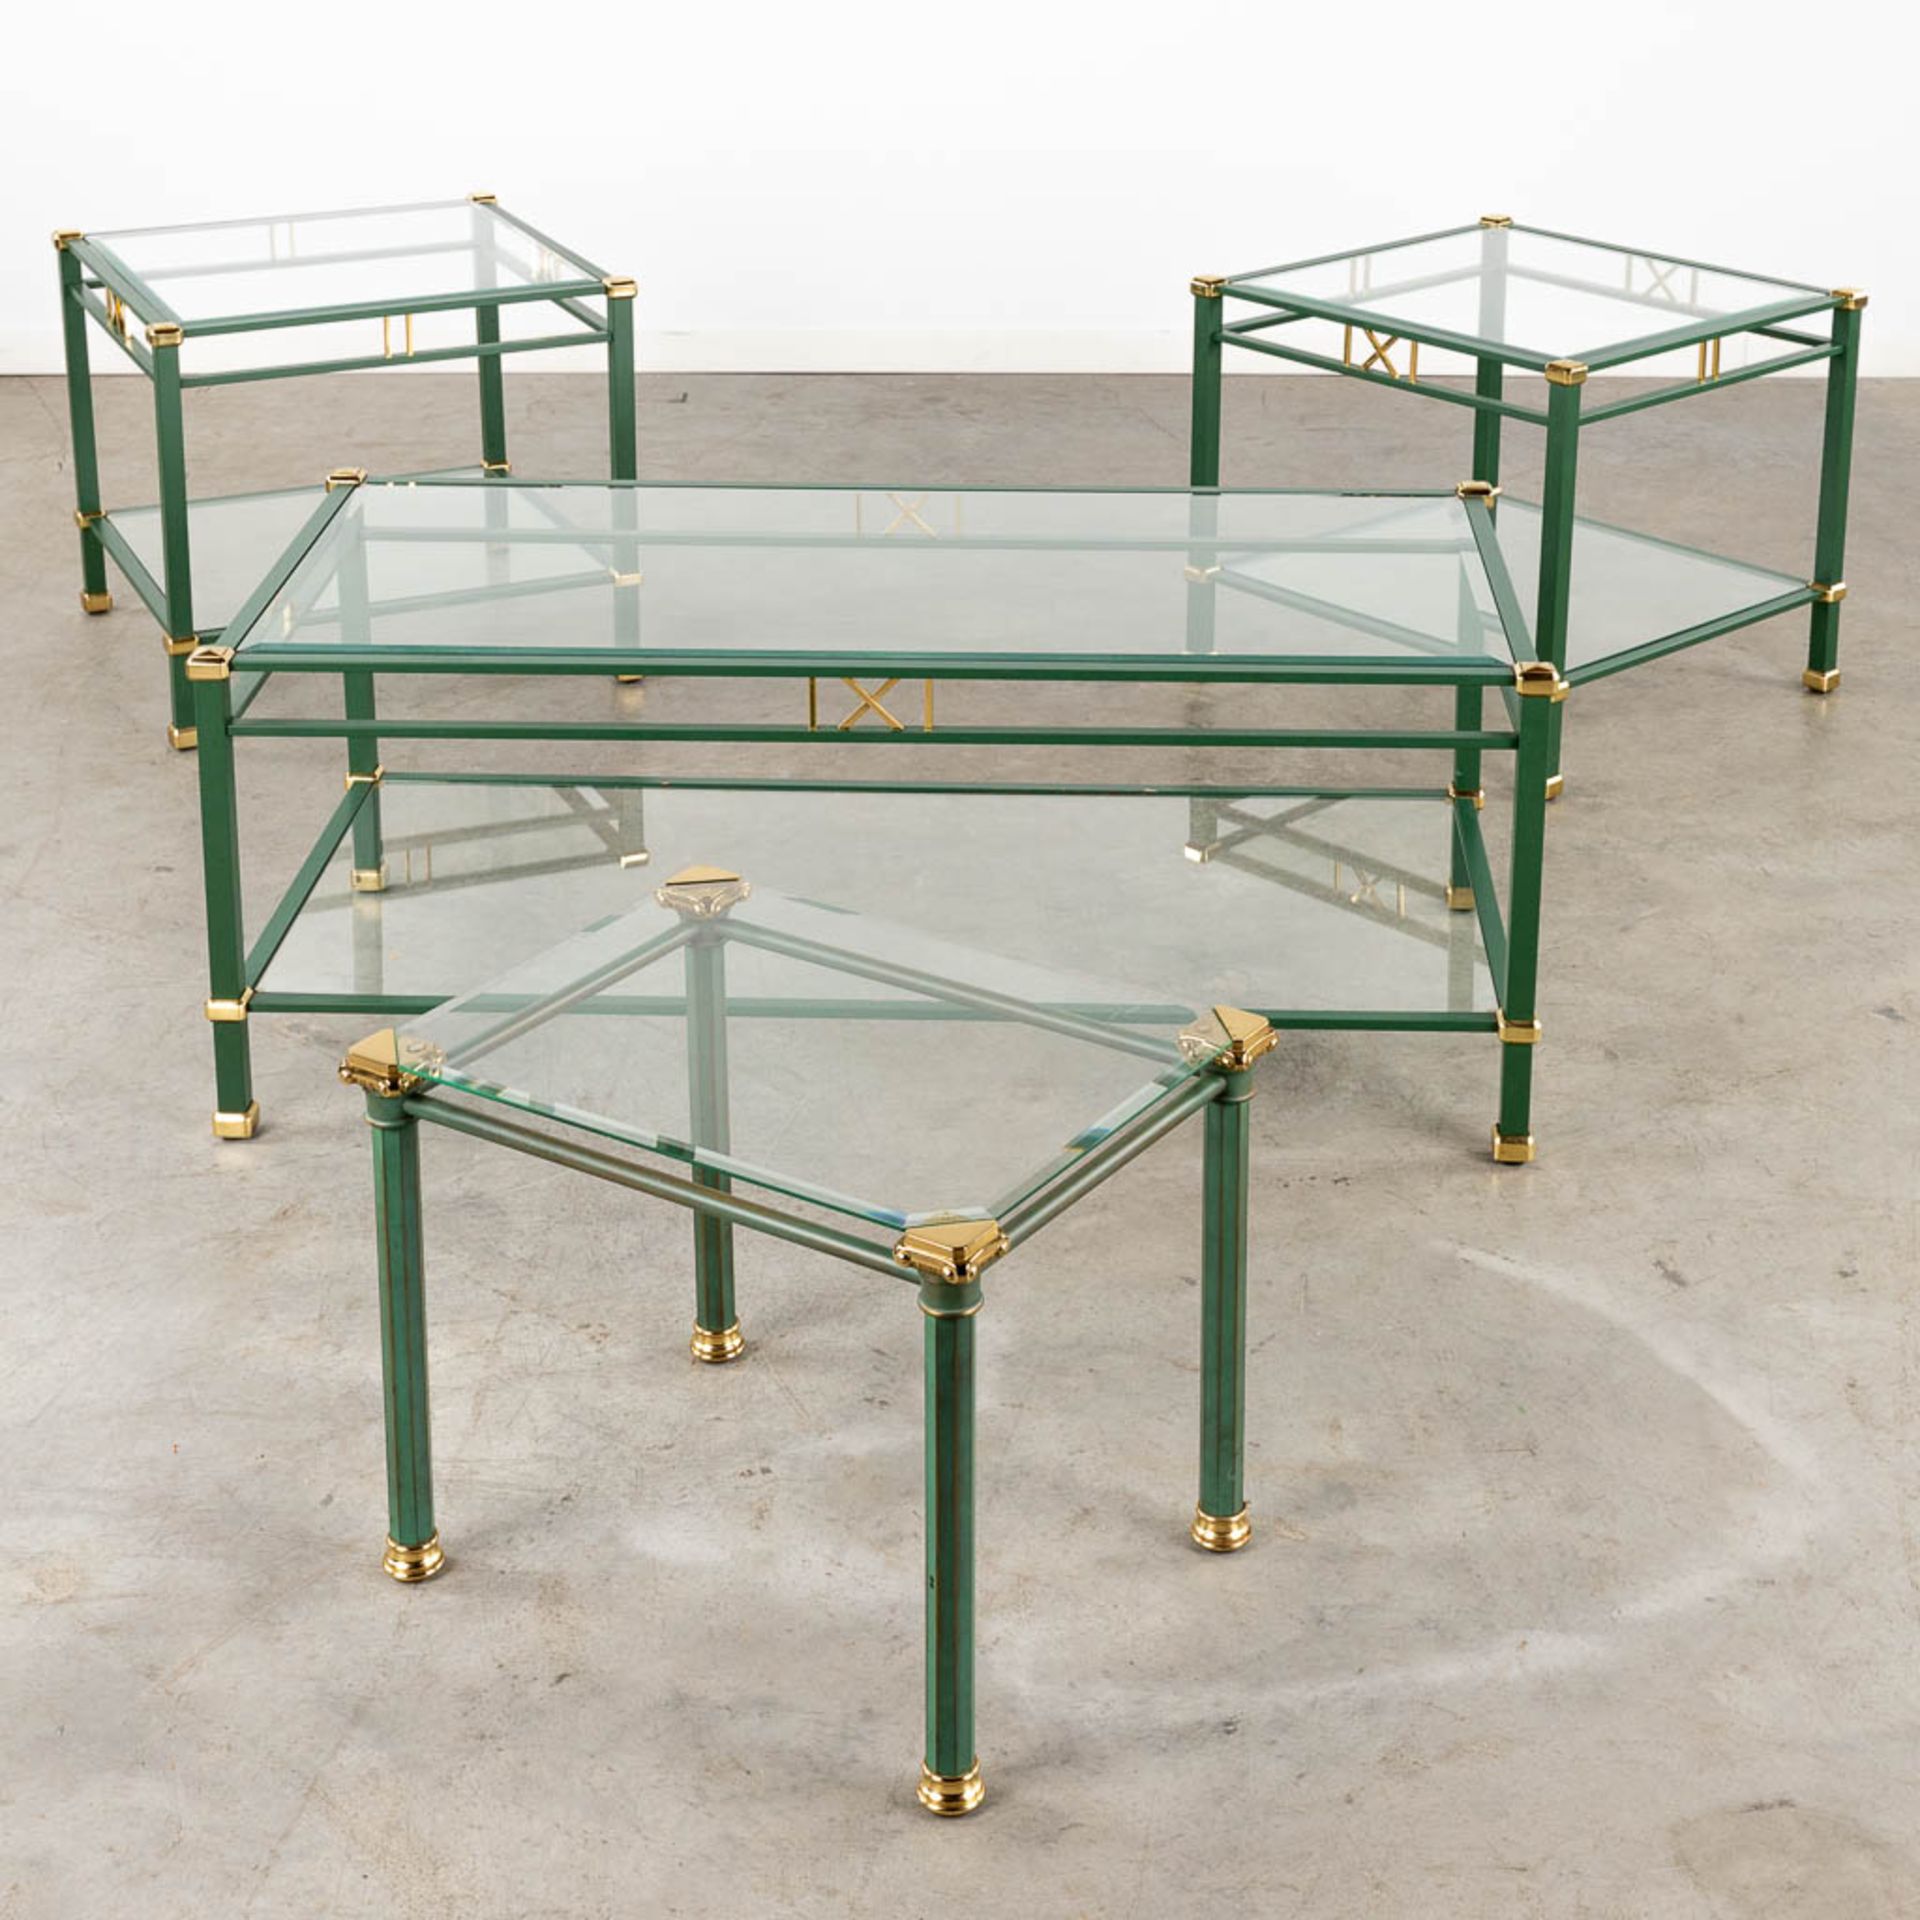 4 matching coffee and side tables, lacquered metal and glass, circa 1980. (L:58 x W:118 x H:46 cm)